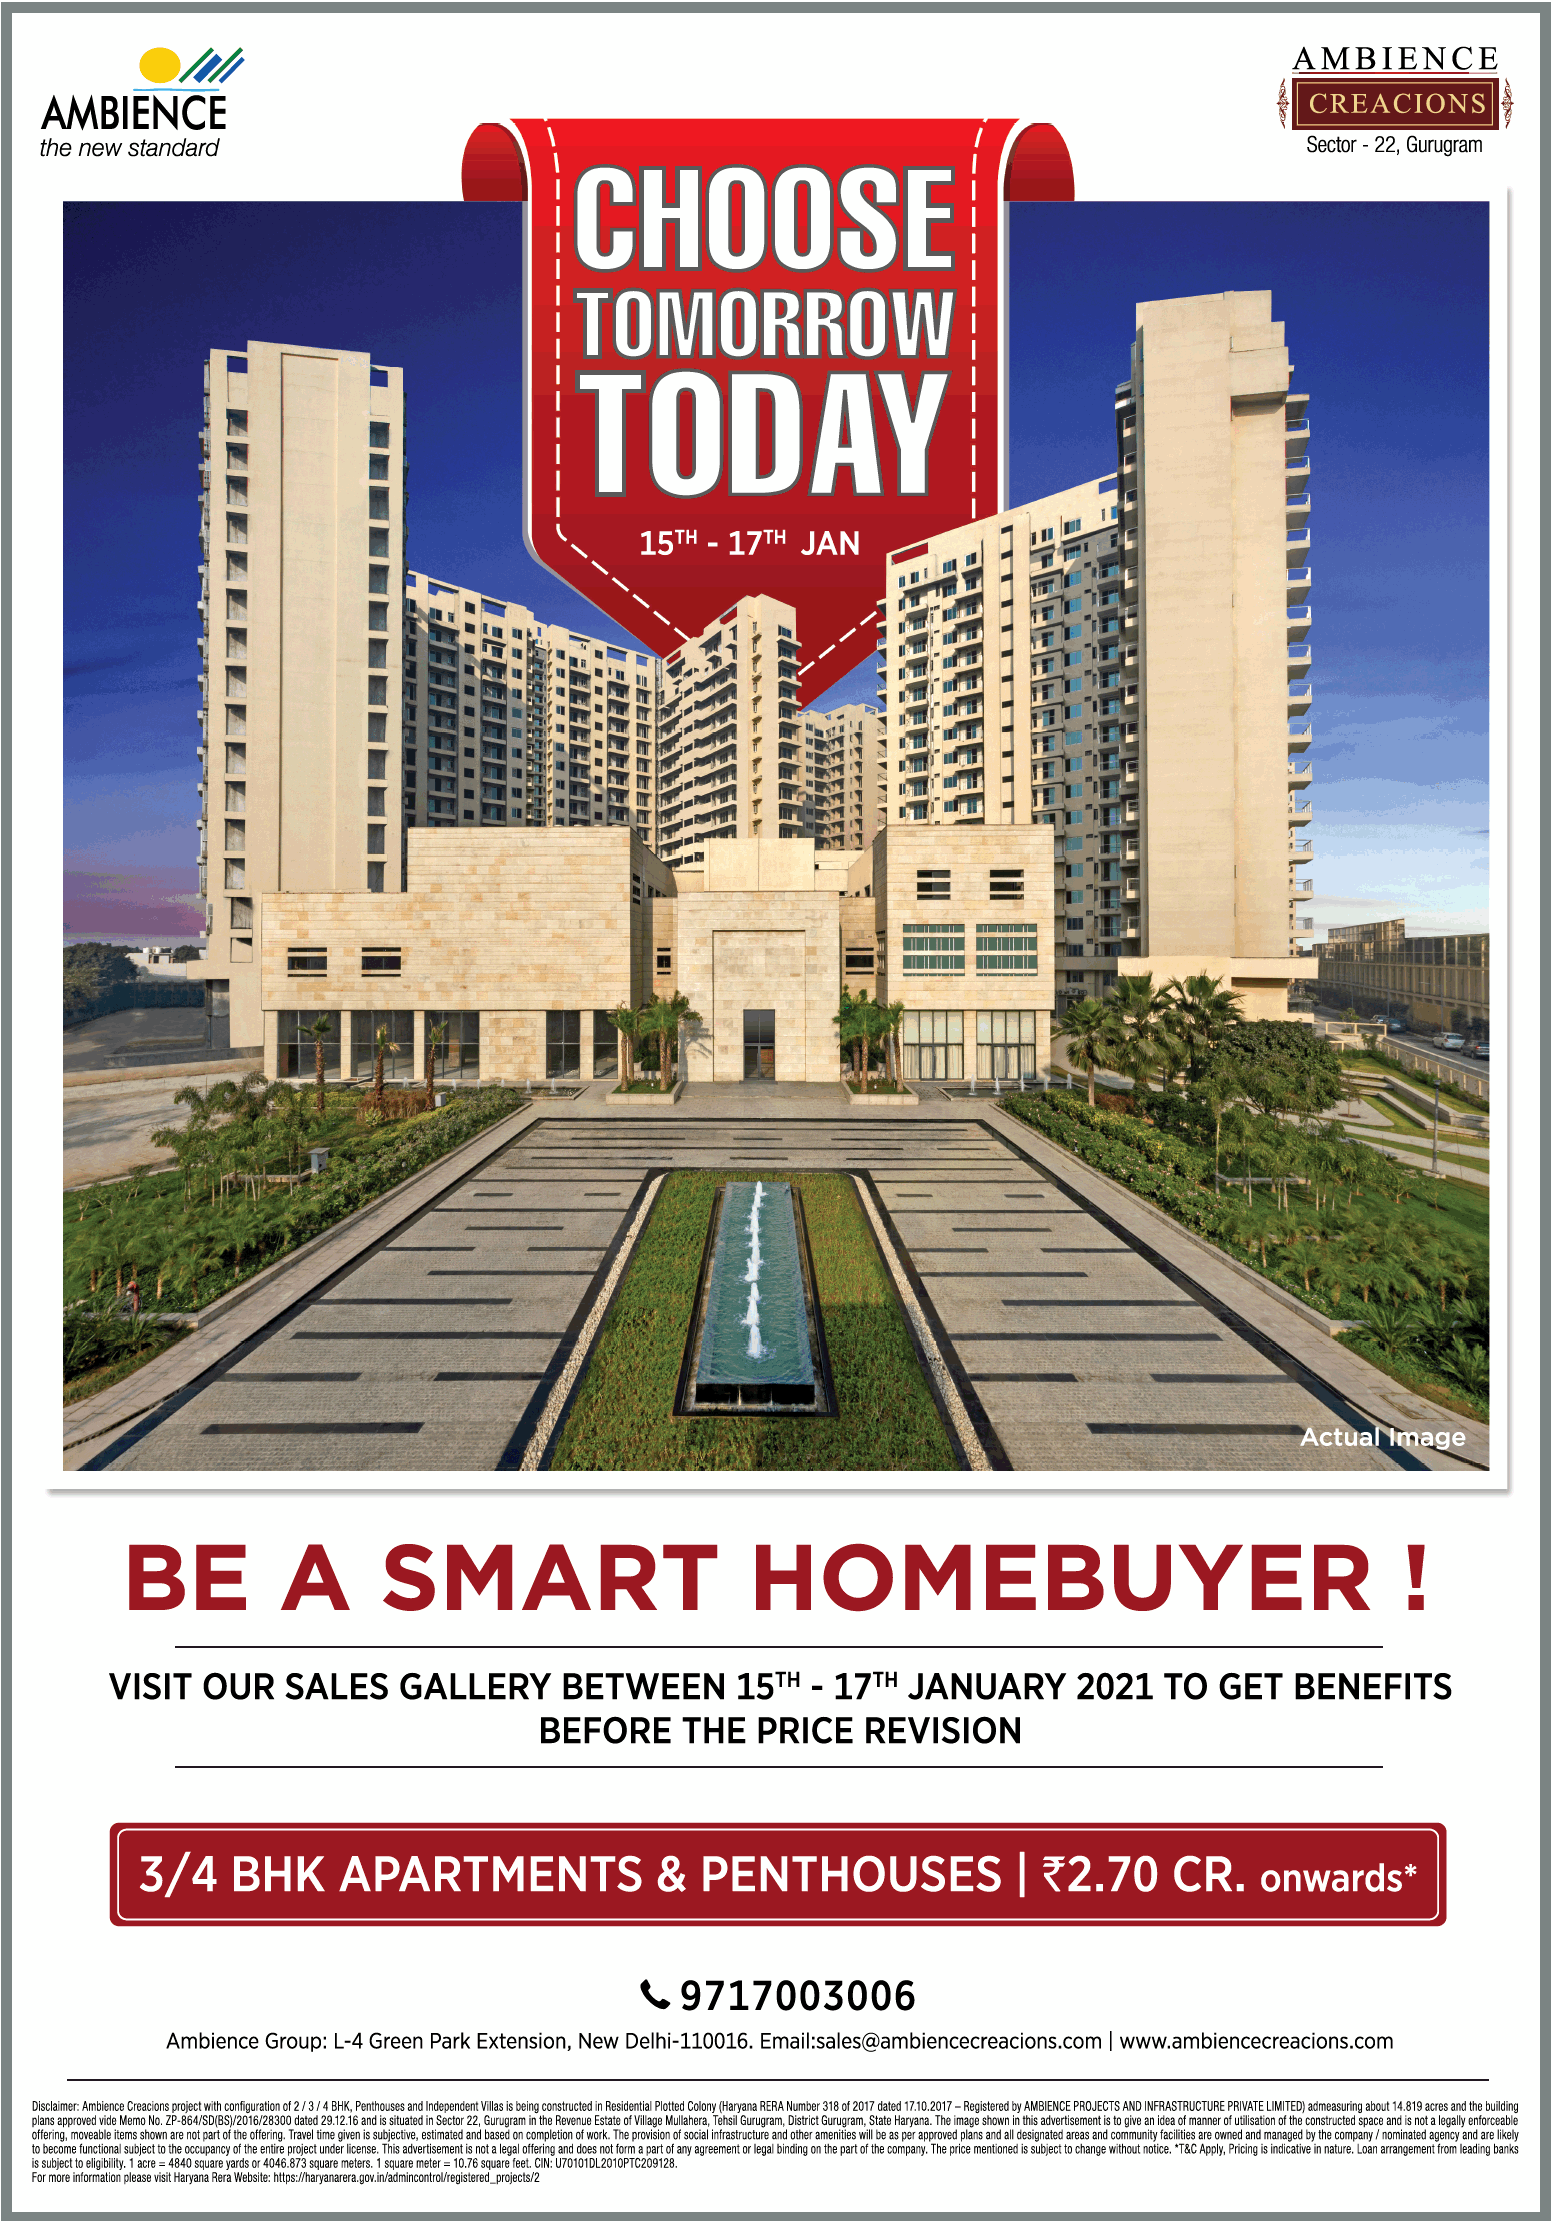 ambience-choose-tomorrow-today-be-a-smart-homebuyer-ad-delhi-times-15-01-2021